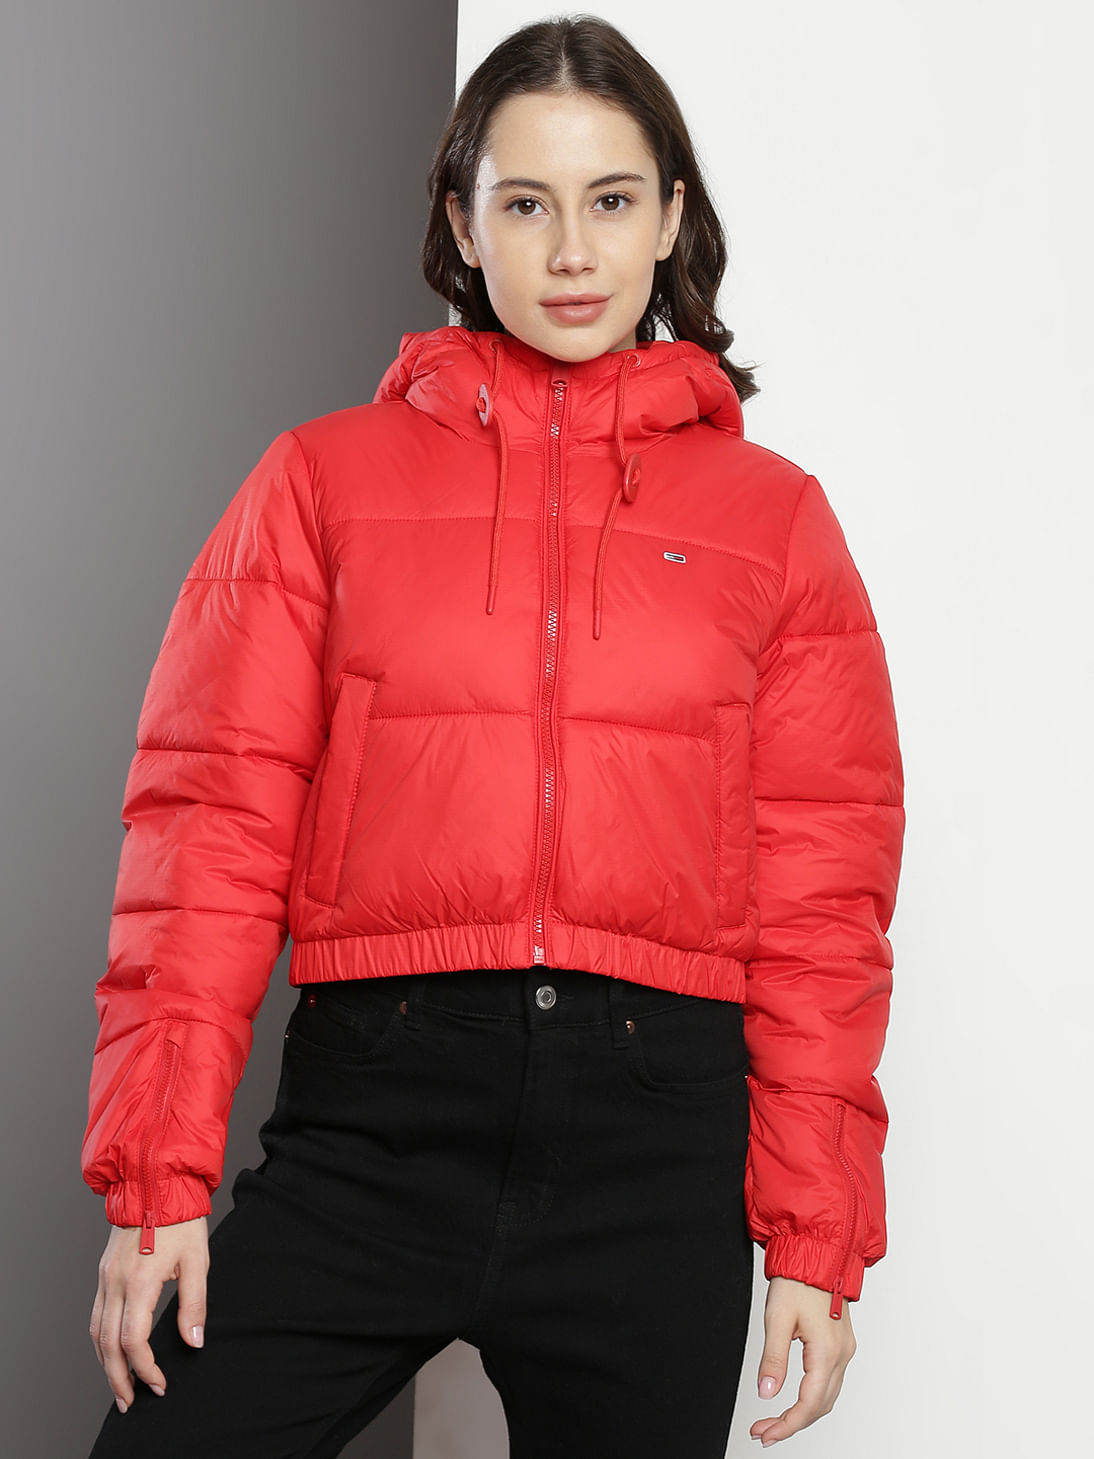 Buy Tommy Hilfiger Cropped Hooded Puffer Jacket - NNNOW.com